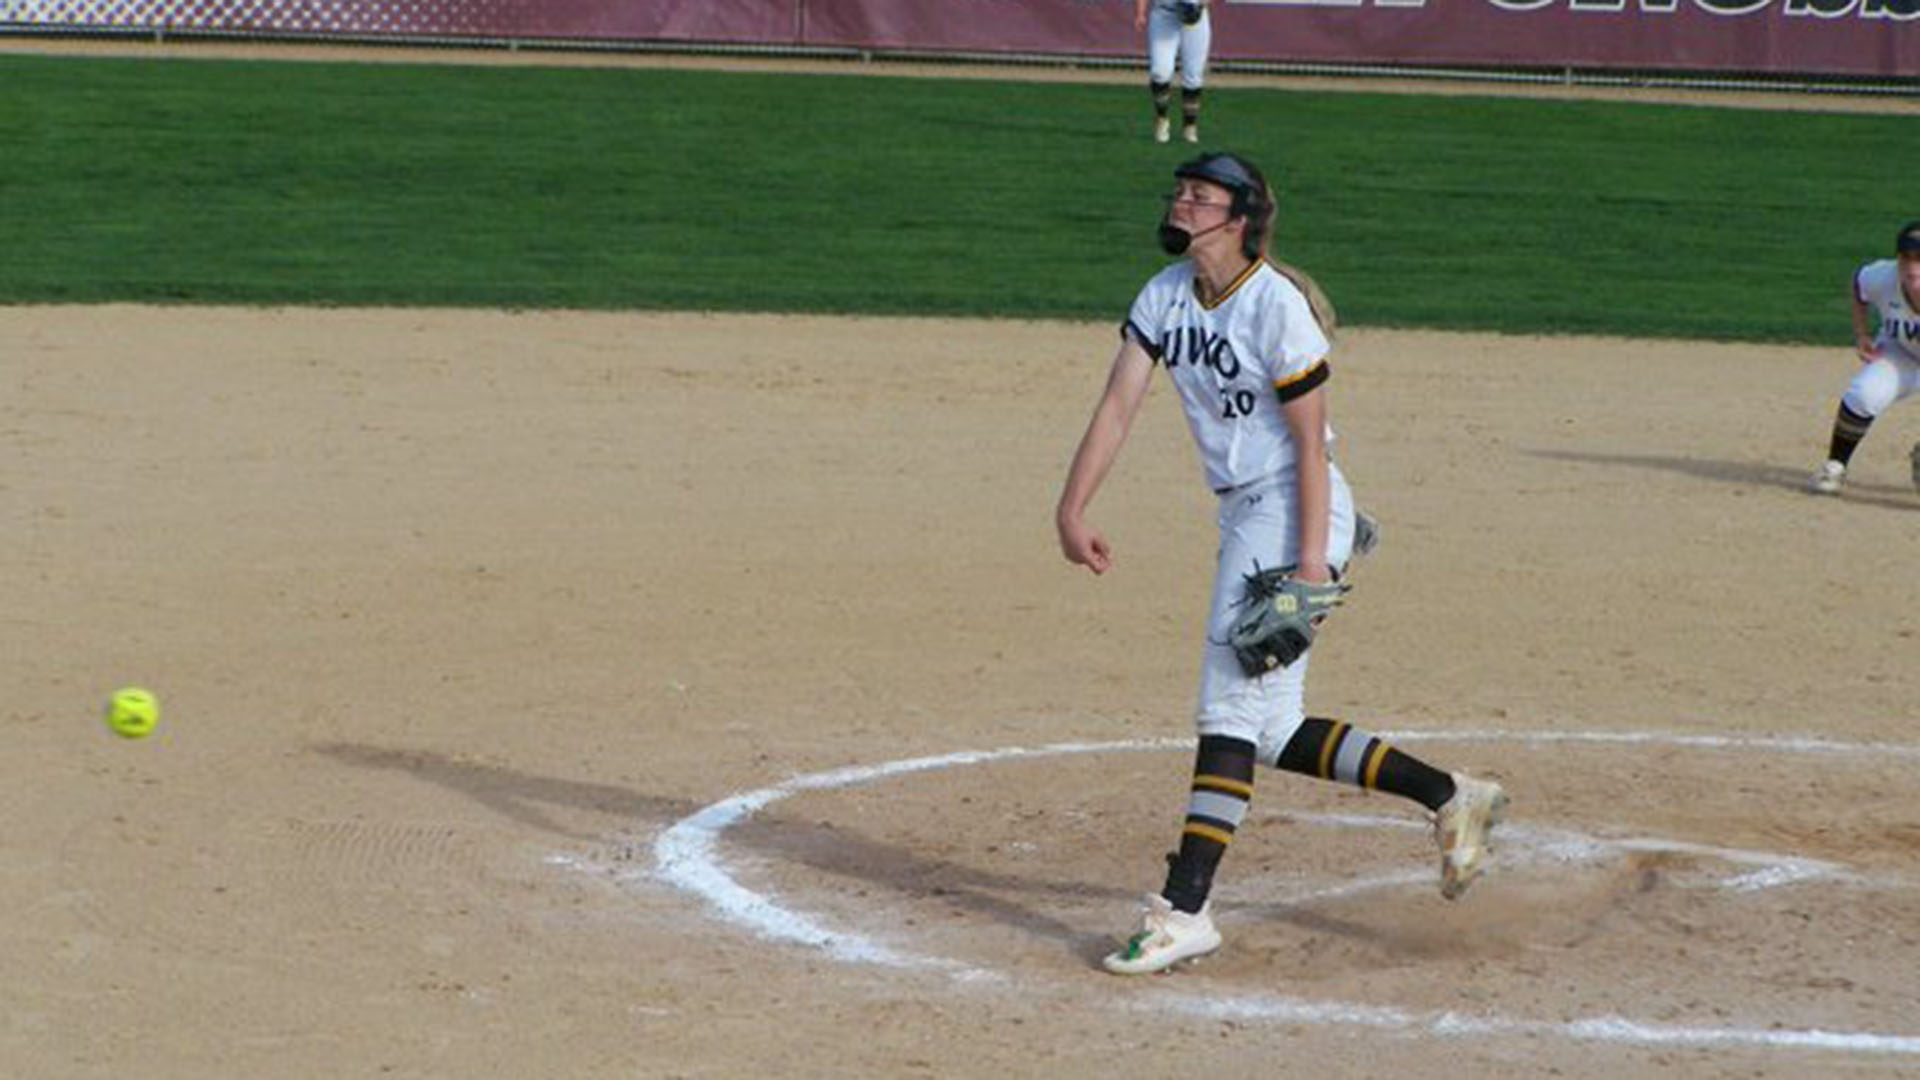 Maddie Fink pitched a two-hit shutout during UW-Oshkosh's victory over UW-River Falls.